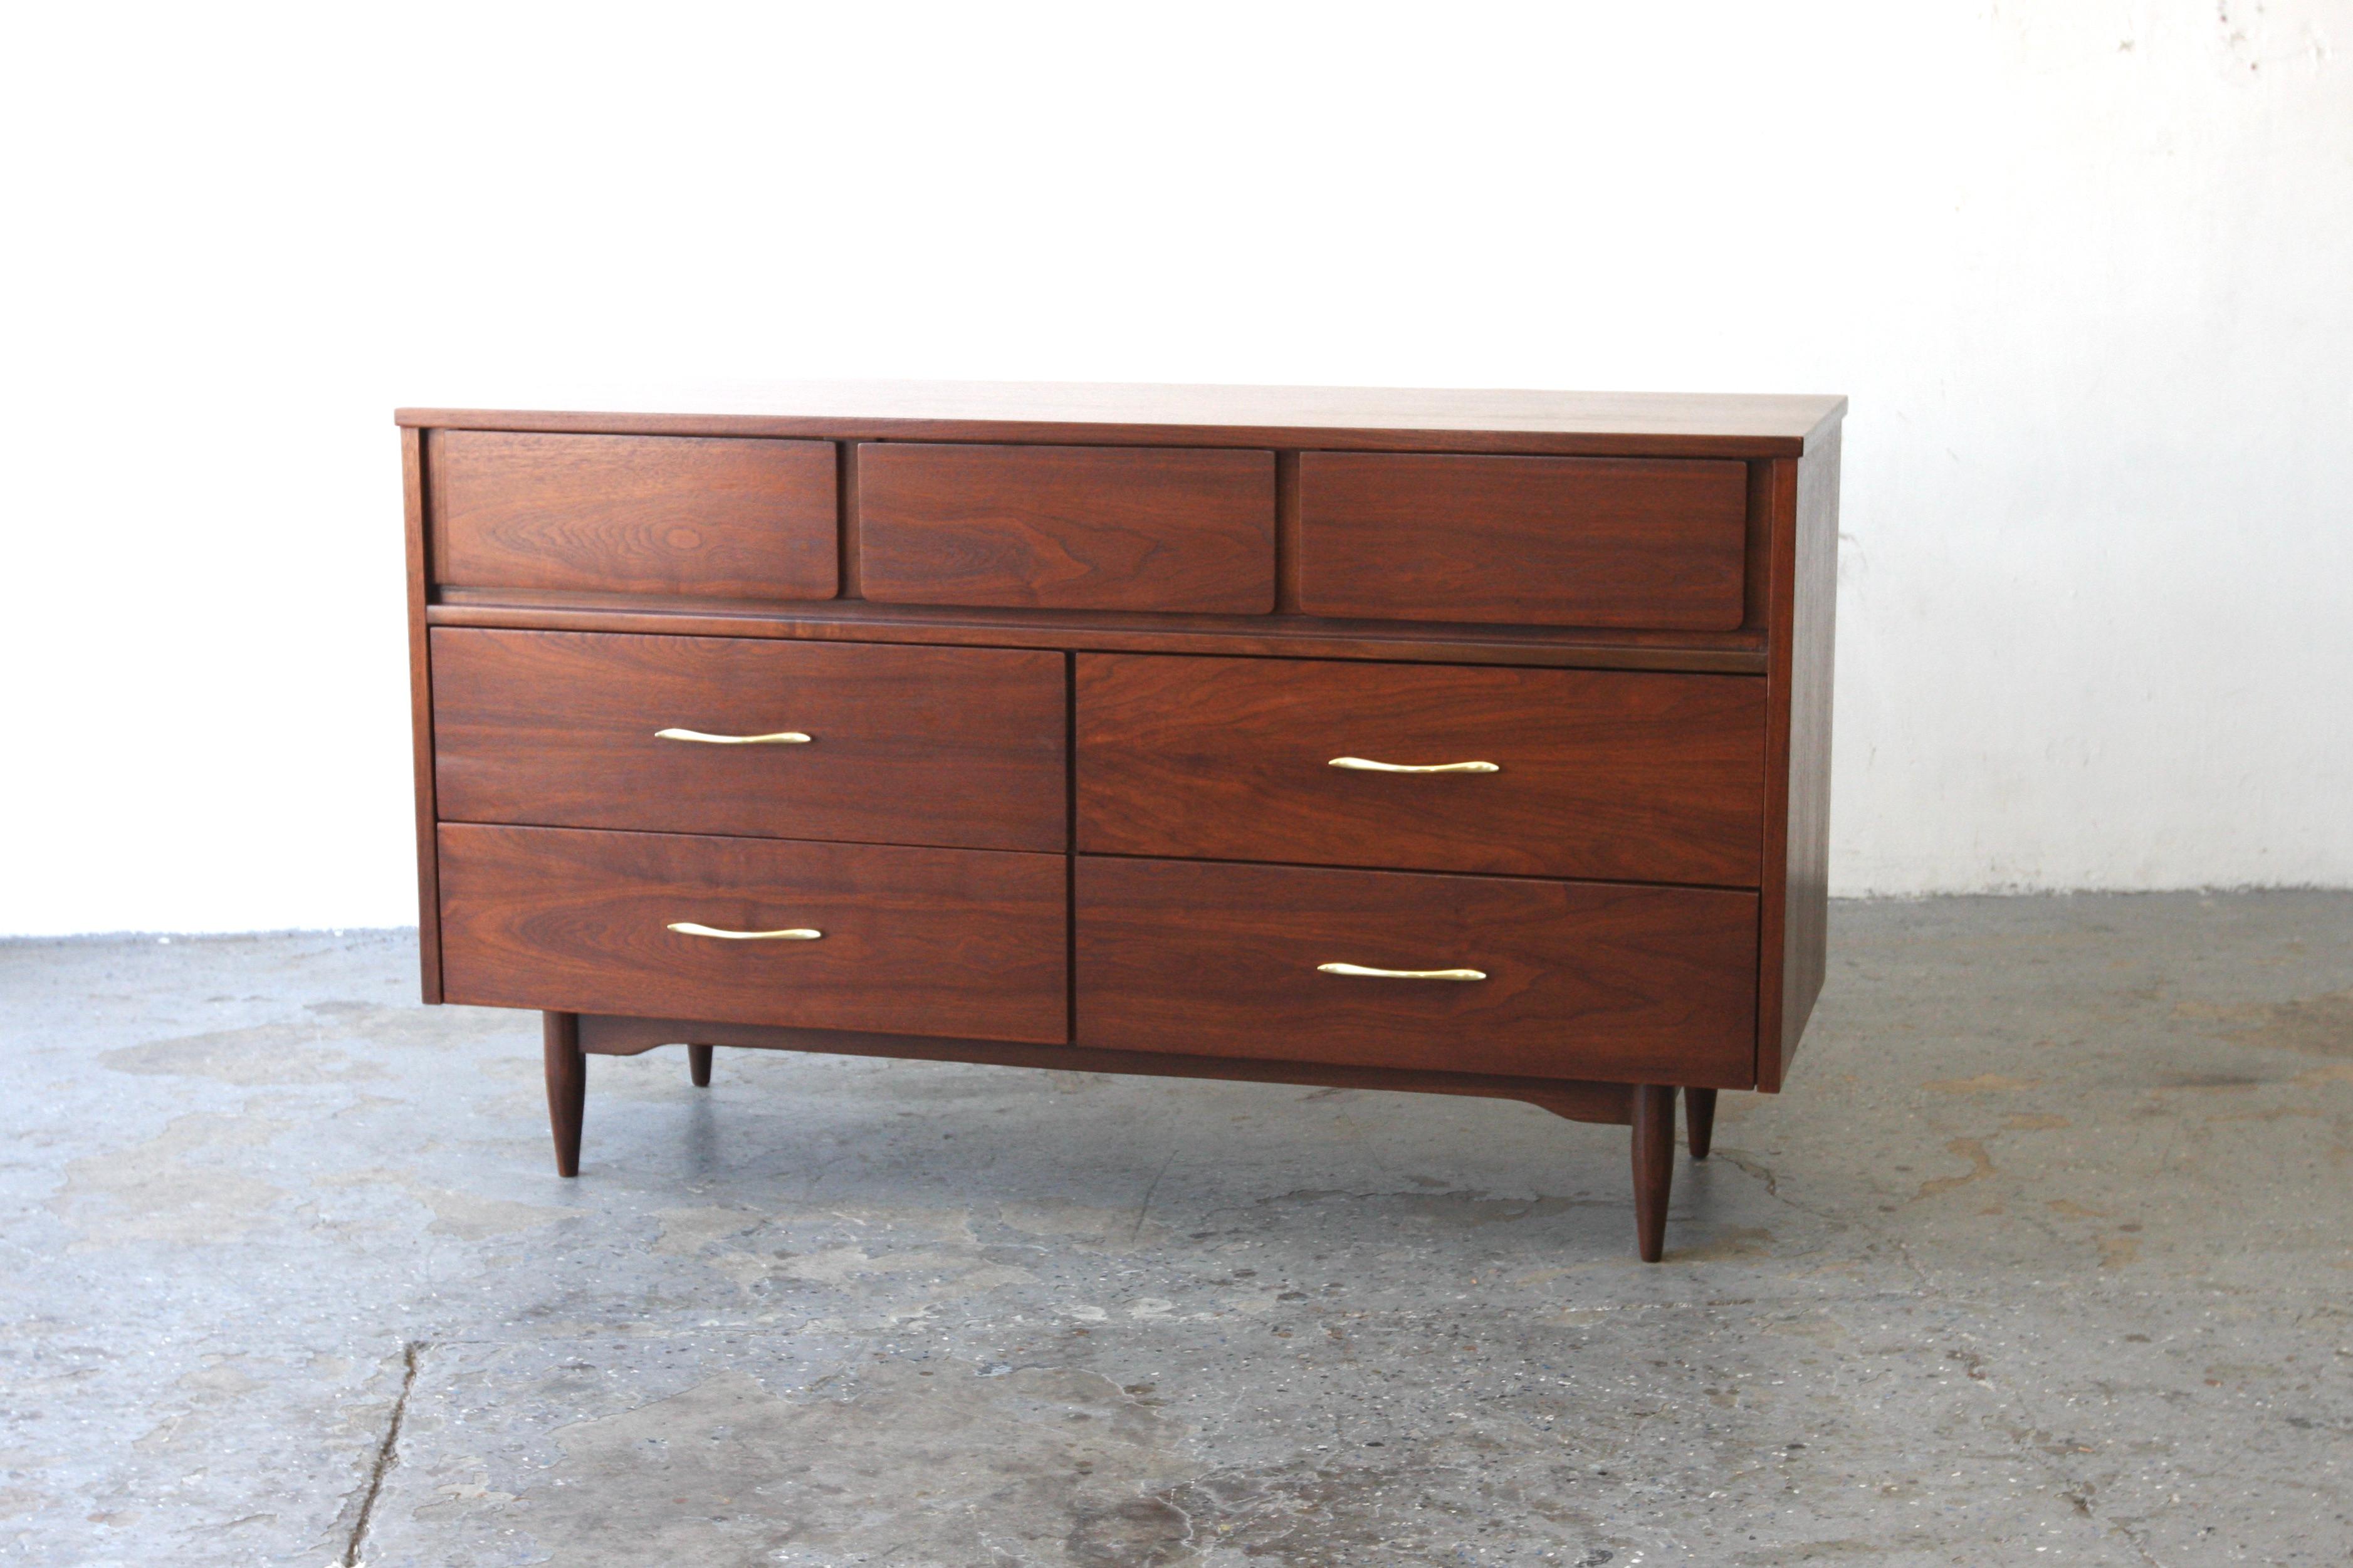 Mid-Century Modern 1960s walnut dresser with seven drawers for Mainline by Hooker Furniture Co. The dresser Professionally Refinished and restored.  Marked in the drawer.

A classic mid-century design dresser with minimalistic characteristics. Its